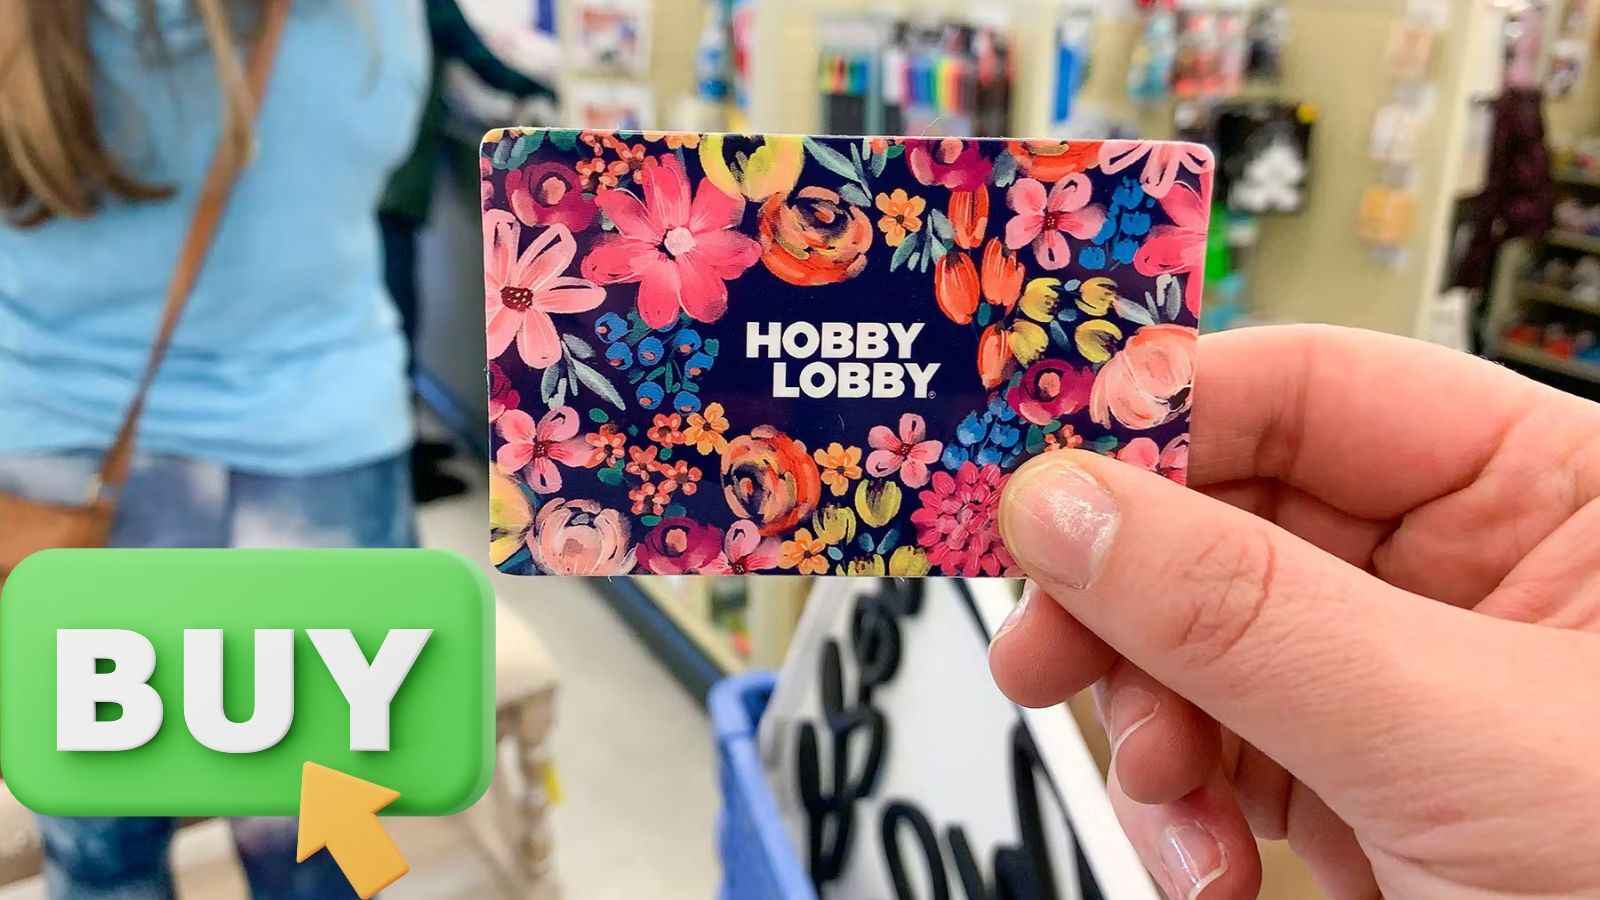 Where Can I Buy Hobby Lobby Gift Cards? (Not Many Options)